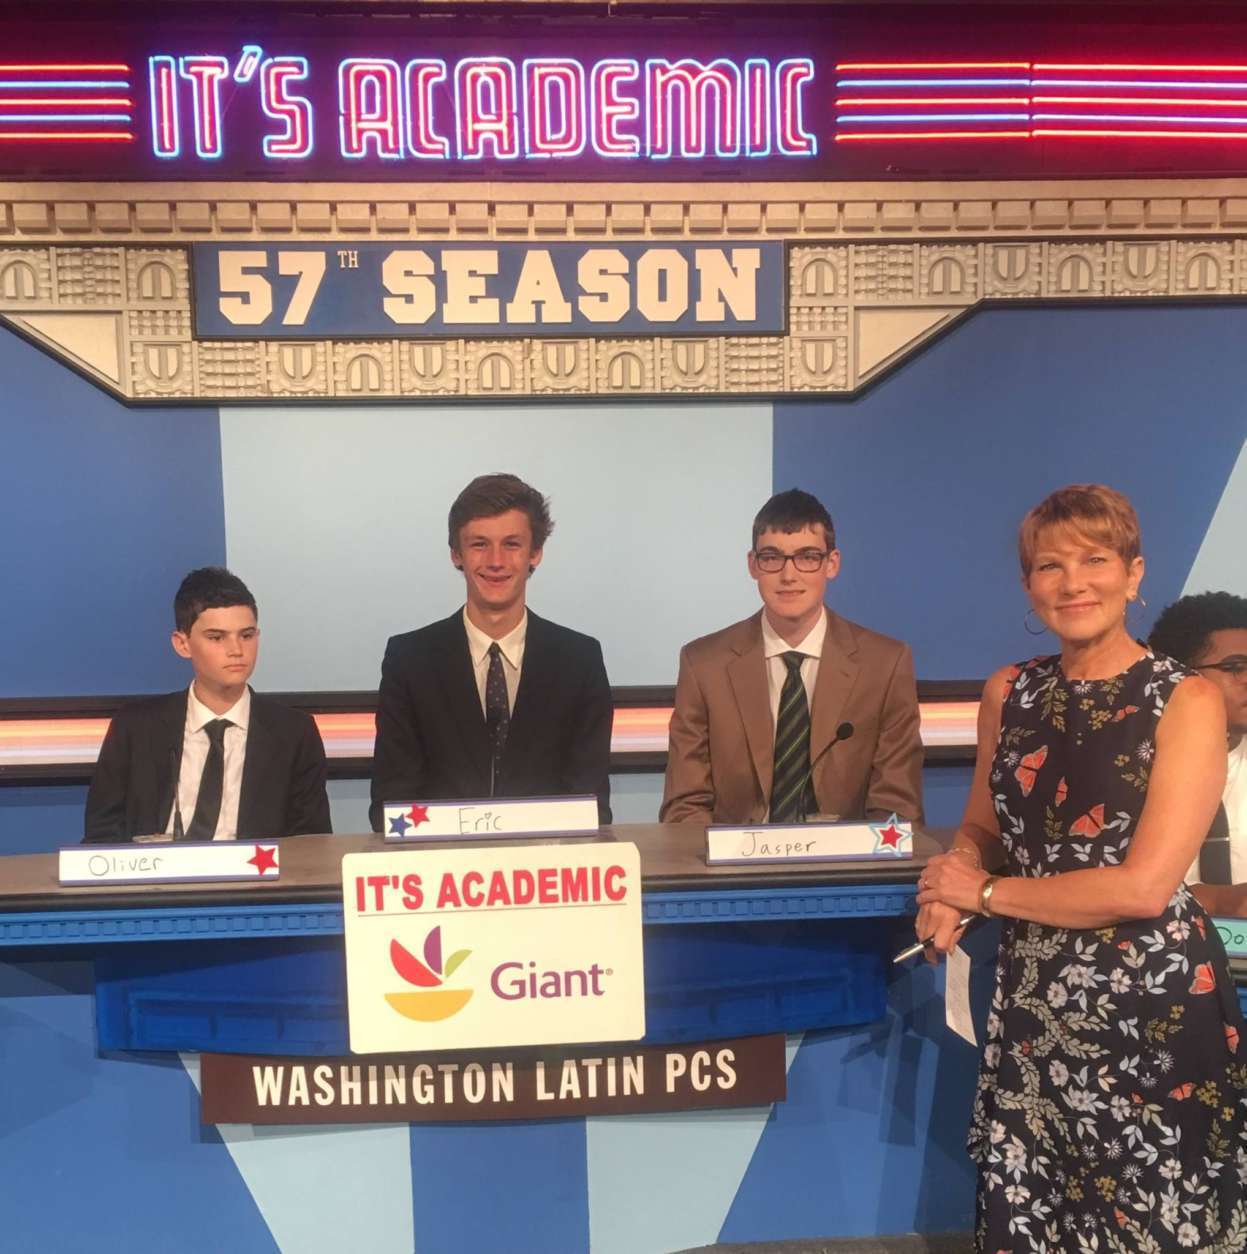 On "It's Academic," Washington Latin Public Charter won against Bowie and Loudoun County high schools. The show aired Oct. 7, 2017. (Courtesy Facebook/It's Academic)